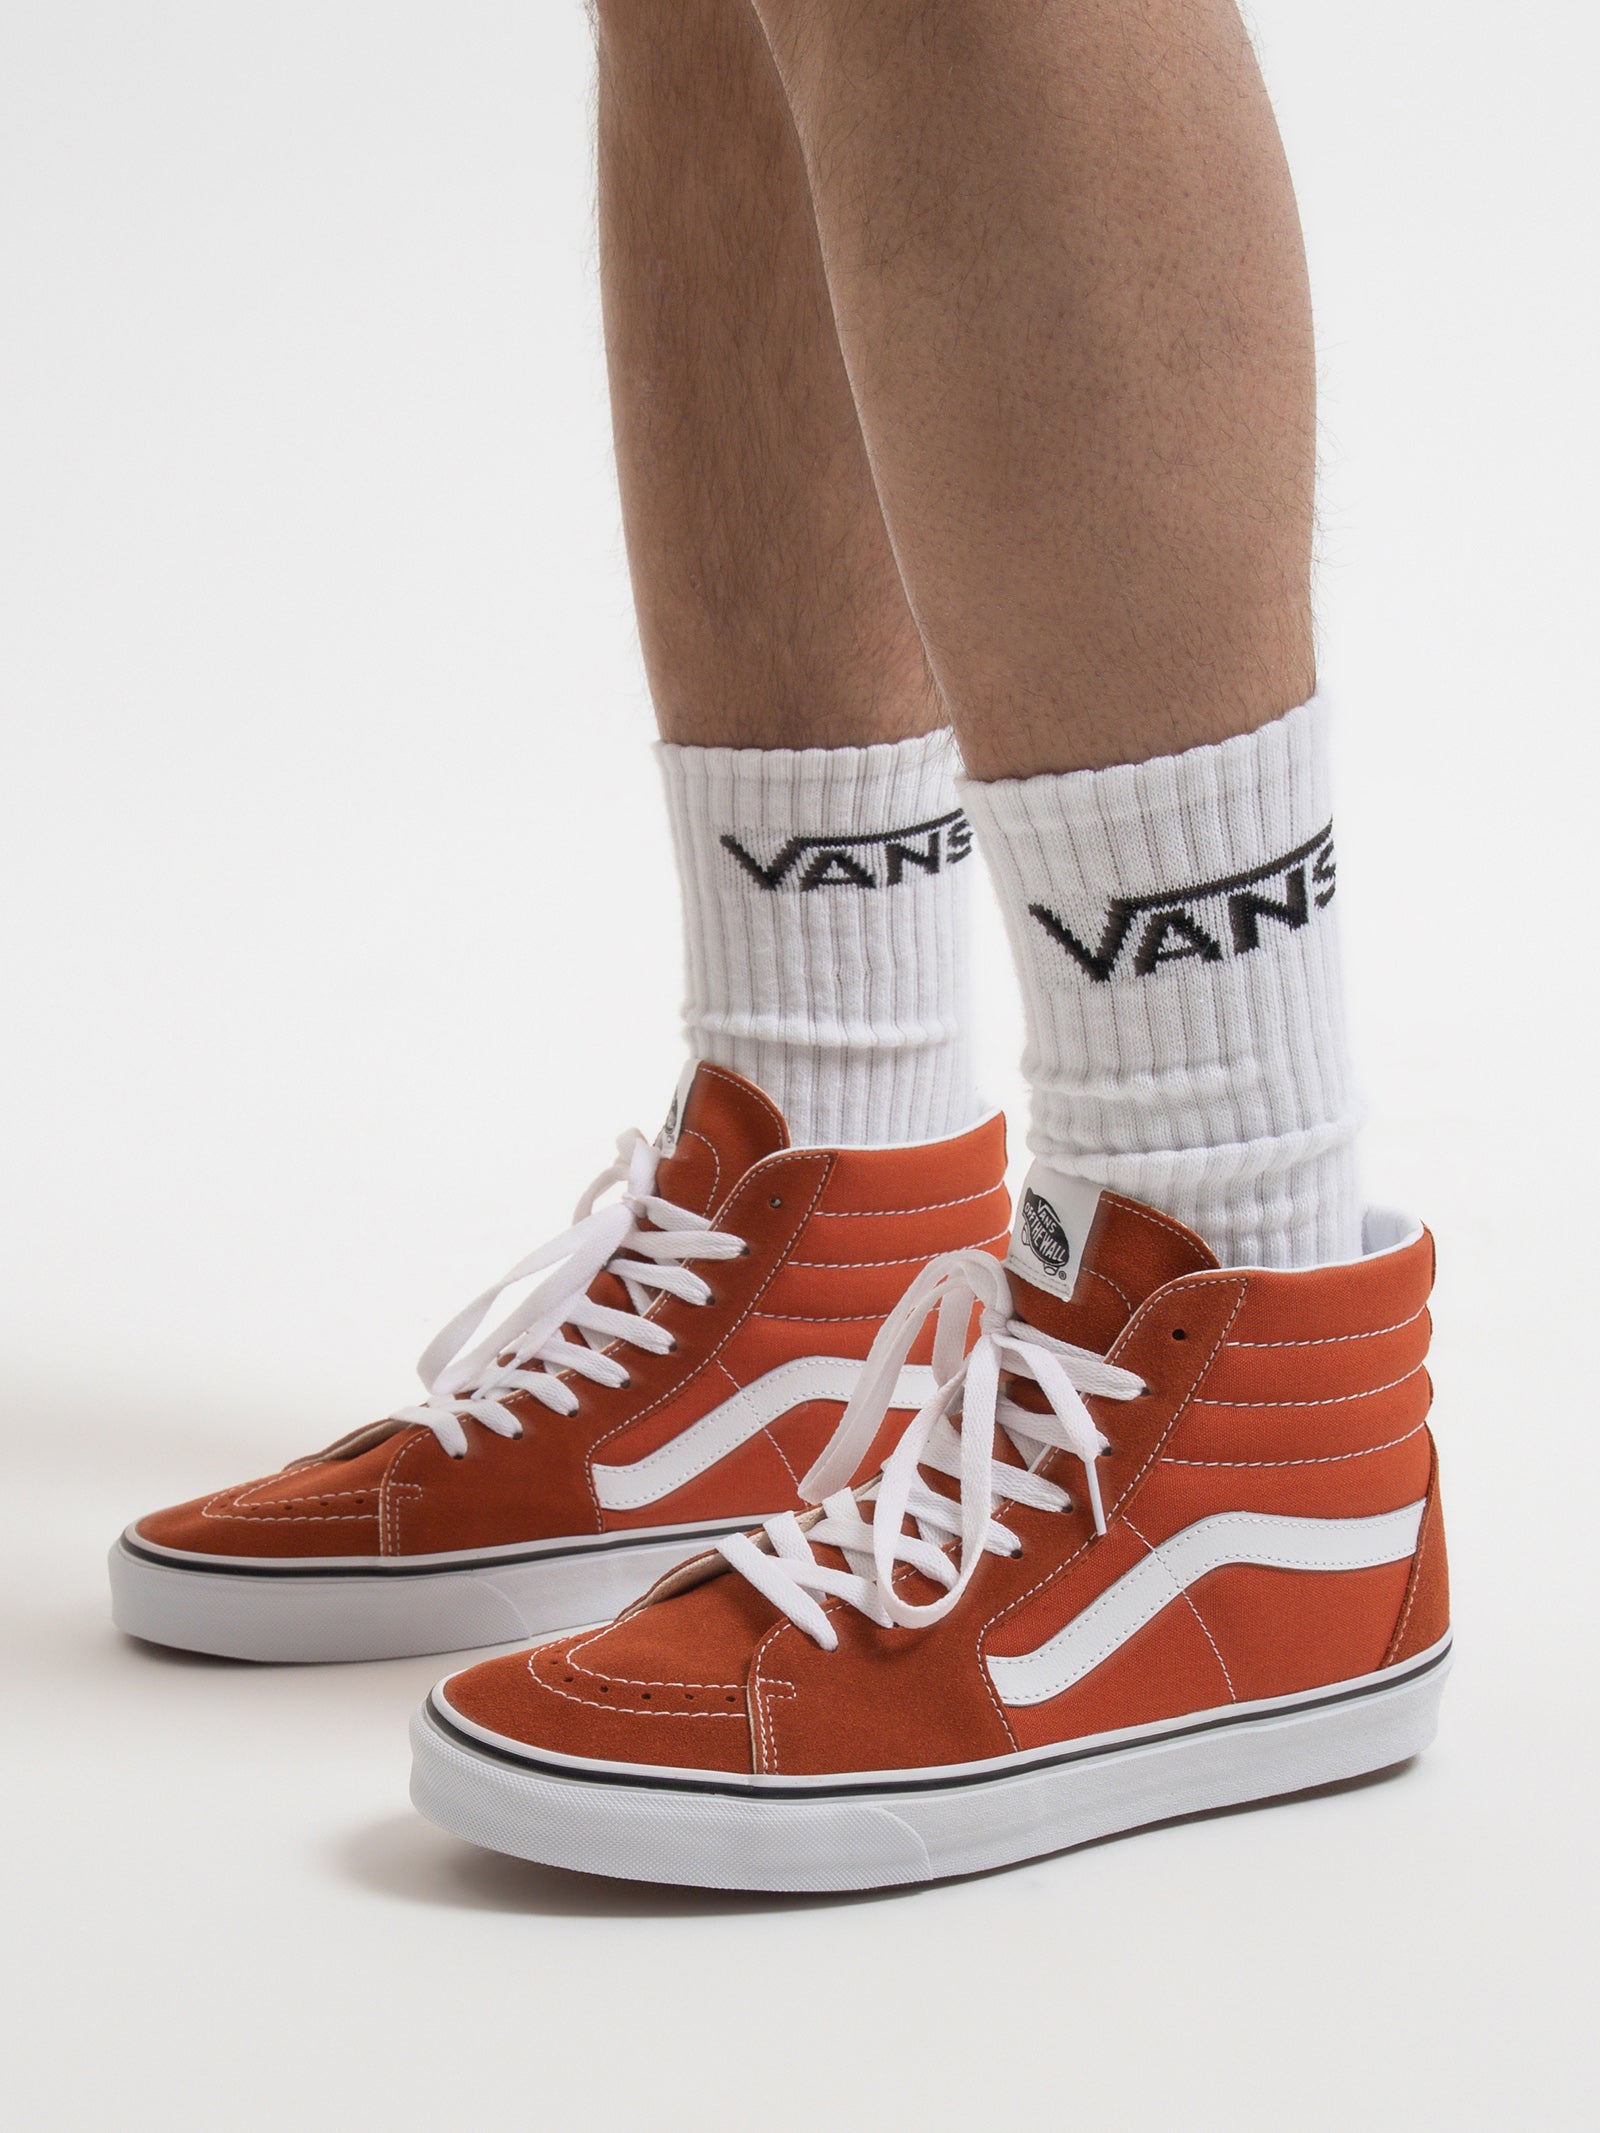 Unisex Sk8-Hi Colour Theory Sneakers in Burnt Ochre